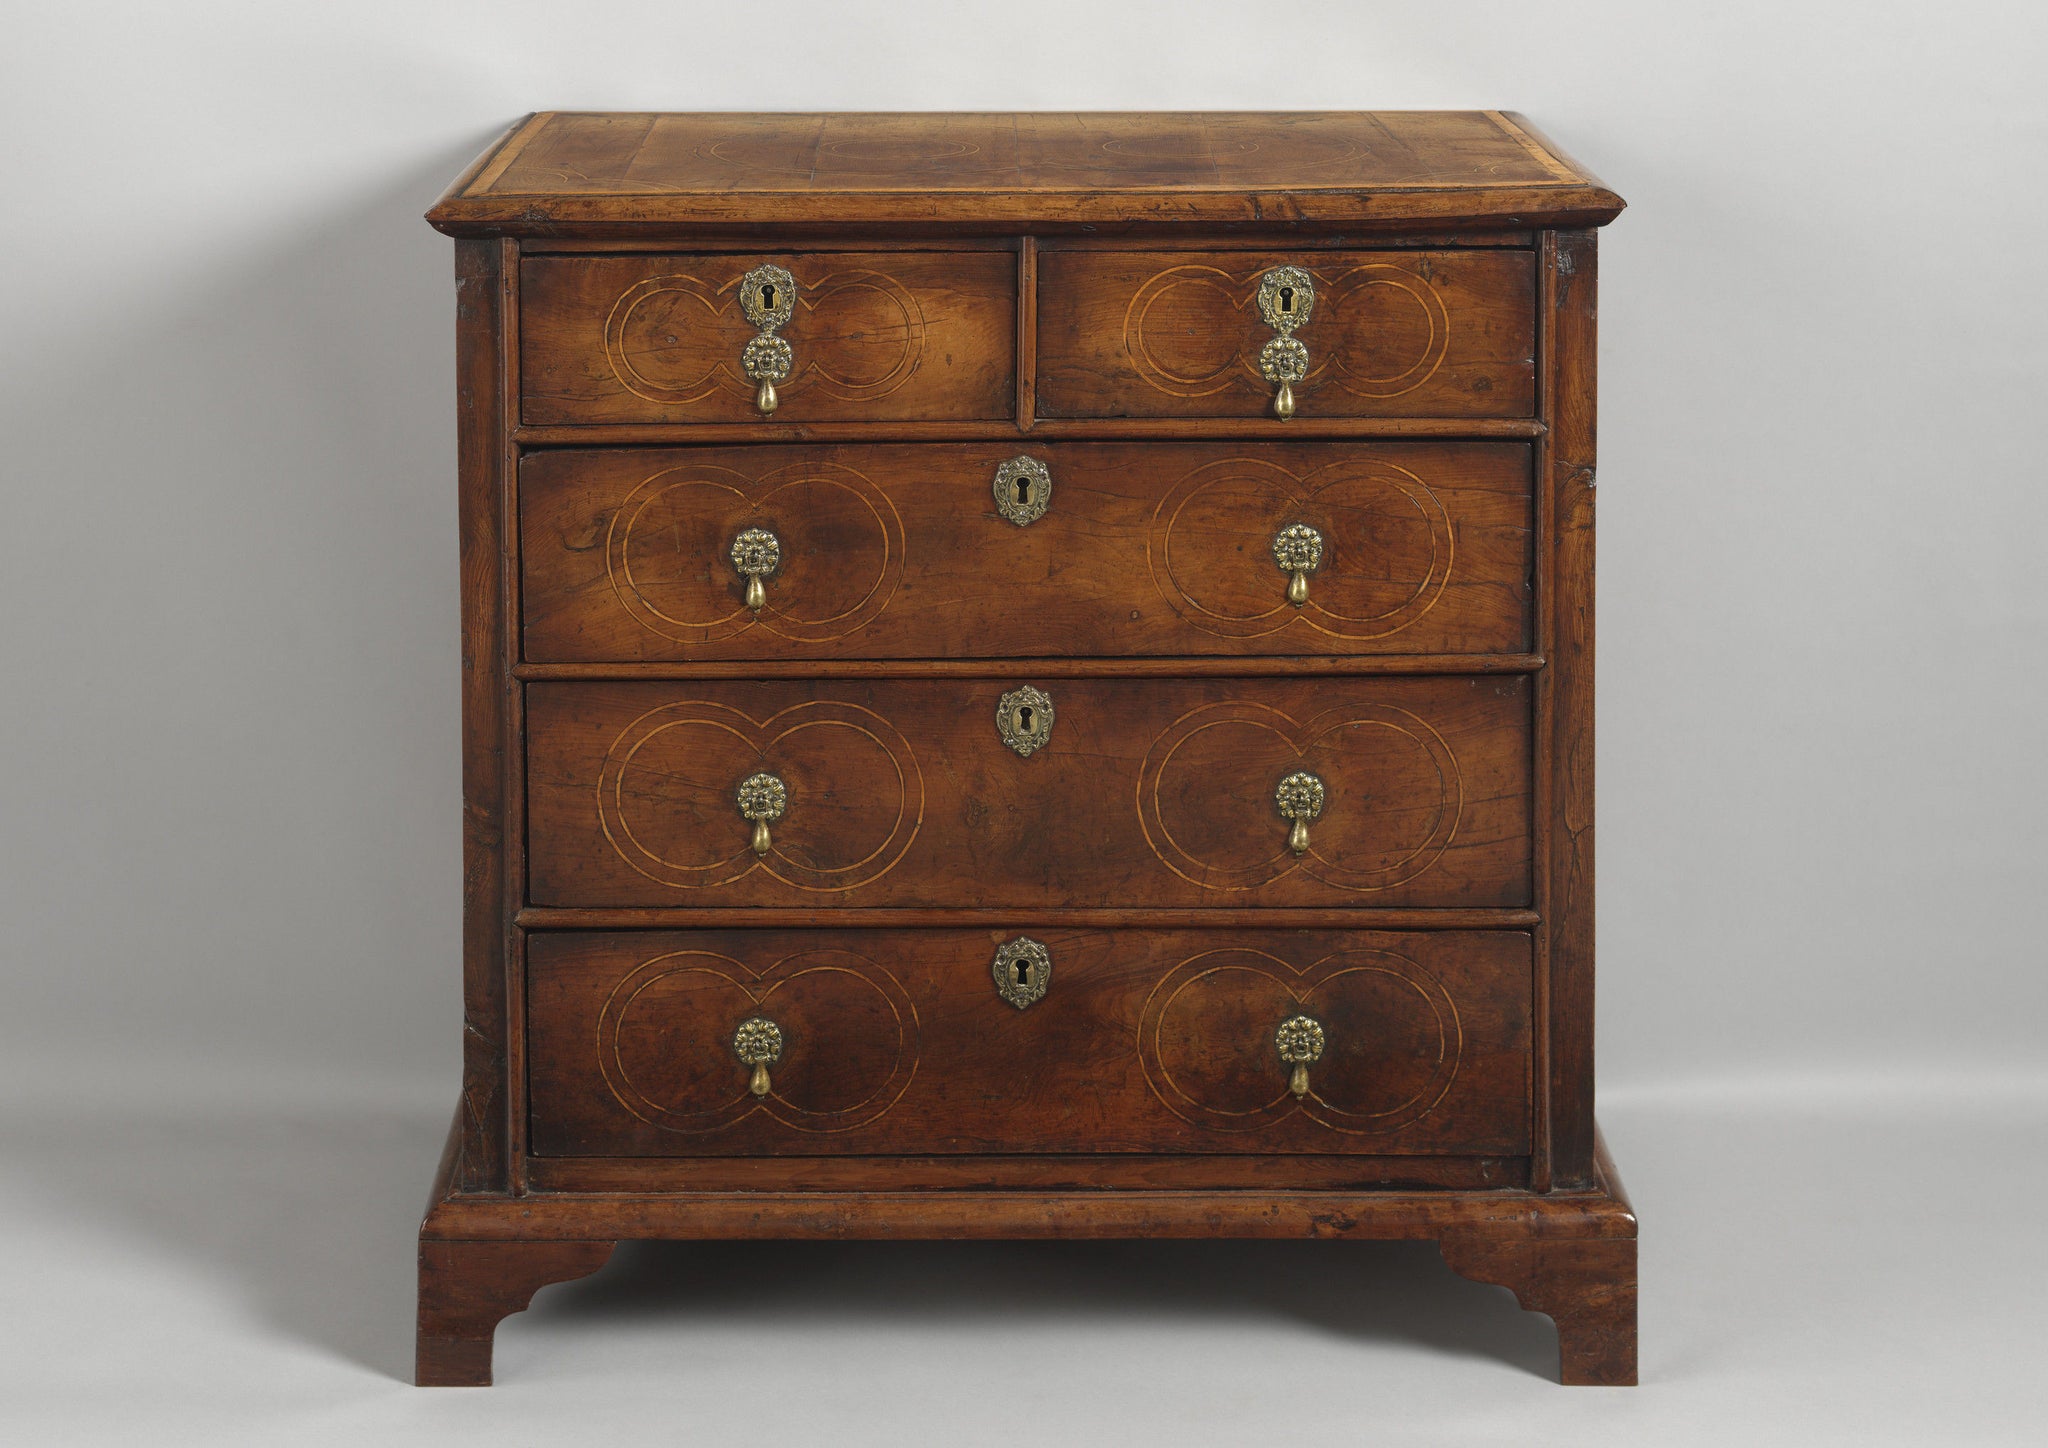 Delightful Small Queen Anne Period Chest of Drawers